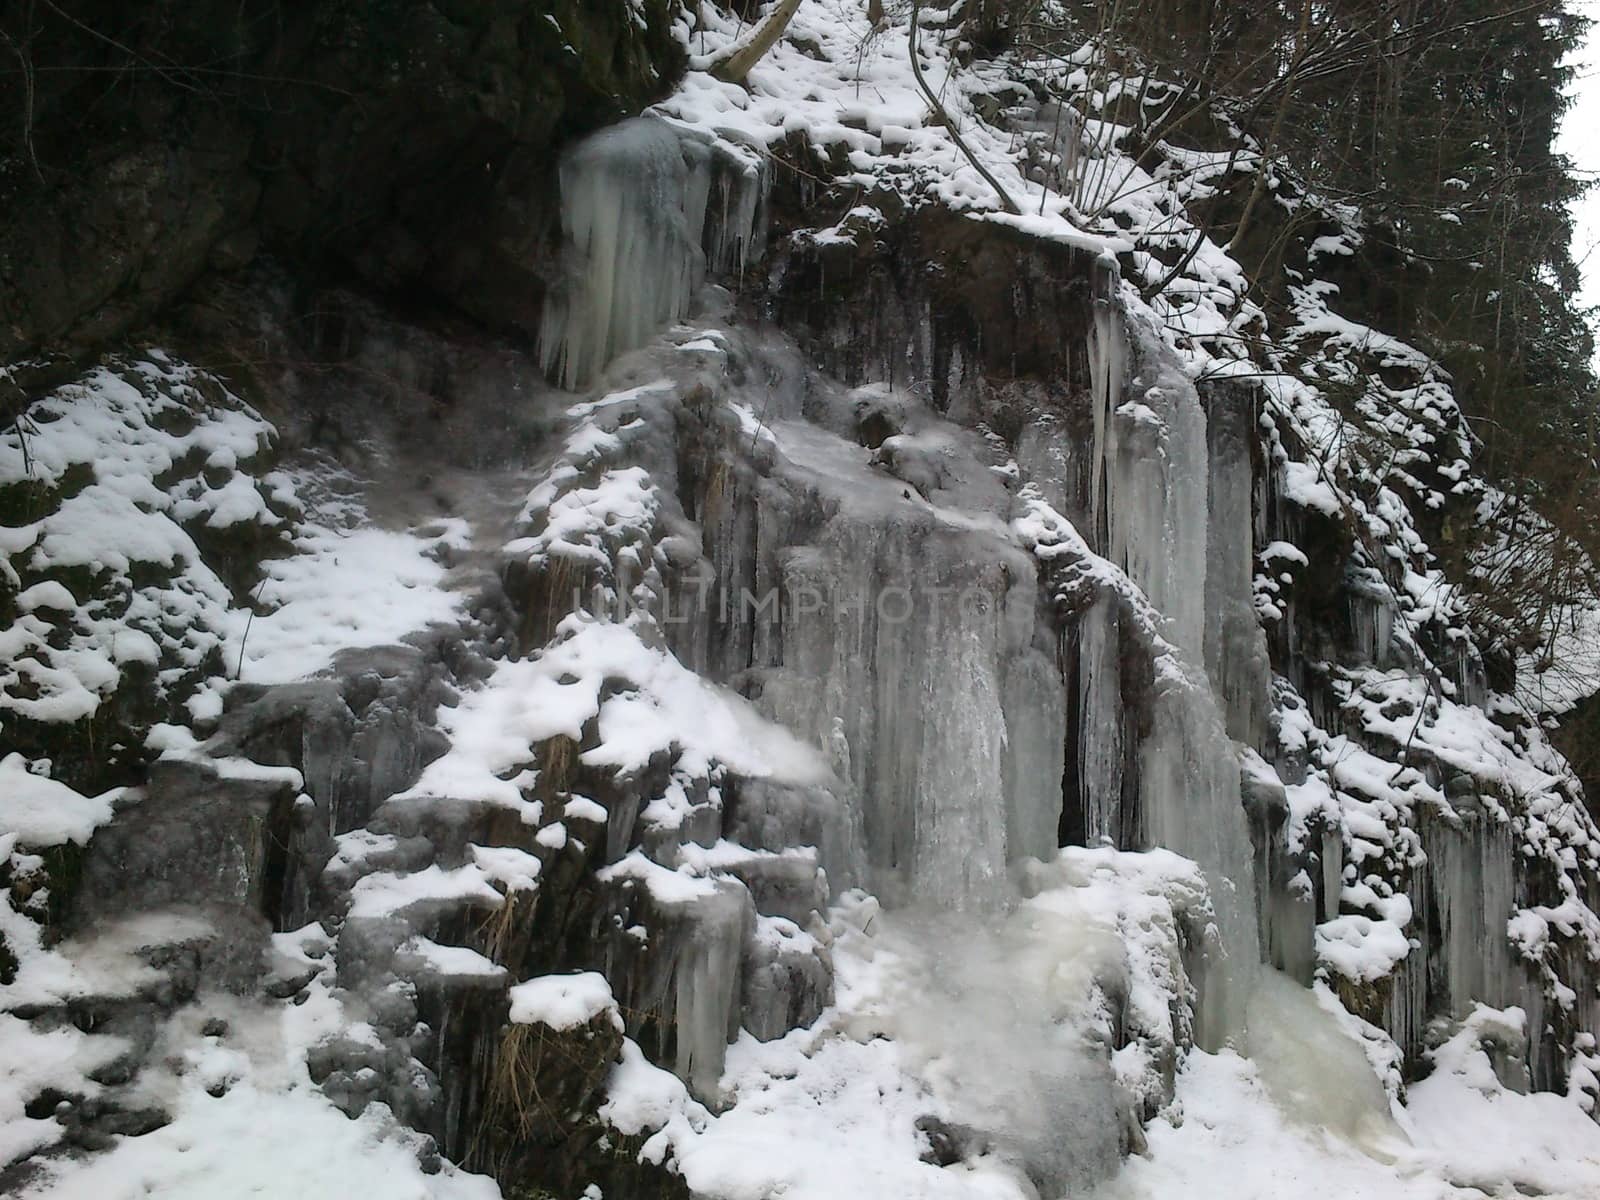 Ice-fall freezing waterfall in Czech republic from february 2013